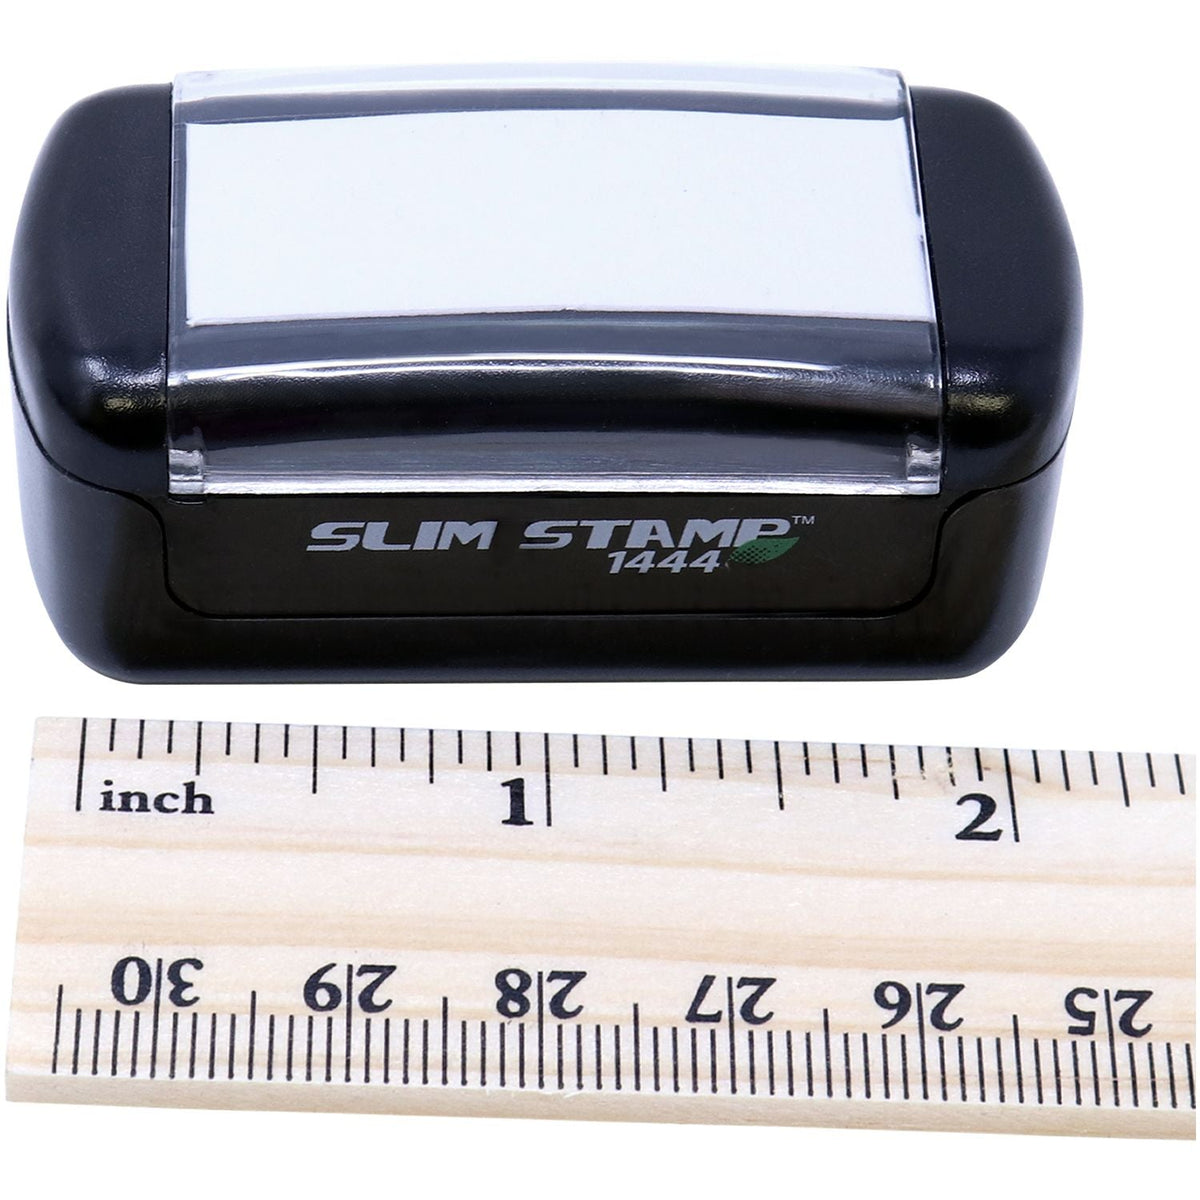 Measurement Slim Pre-Inked Entered with Date Box Stamp with Ruler